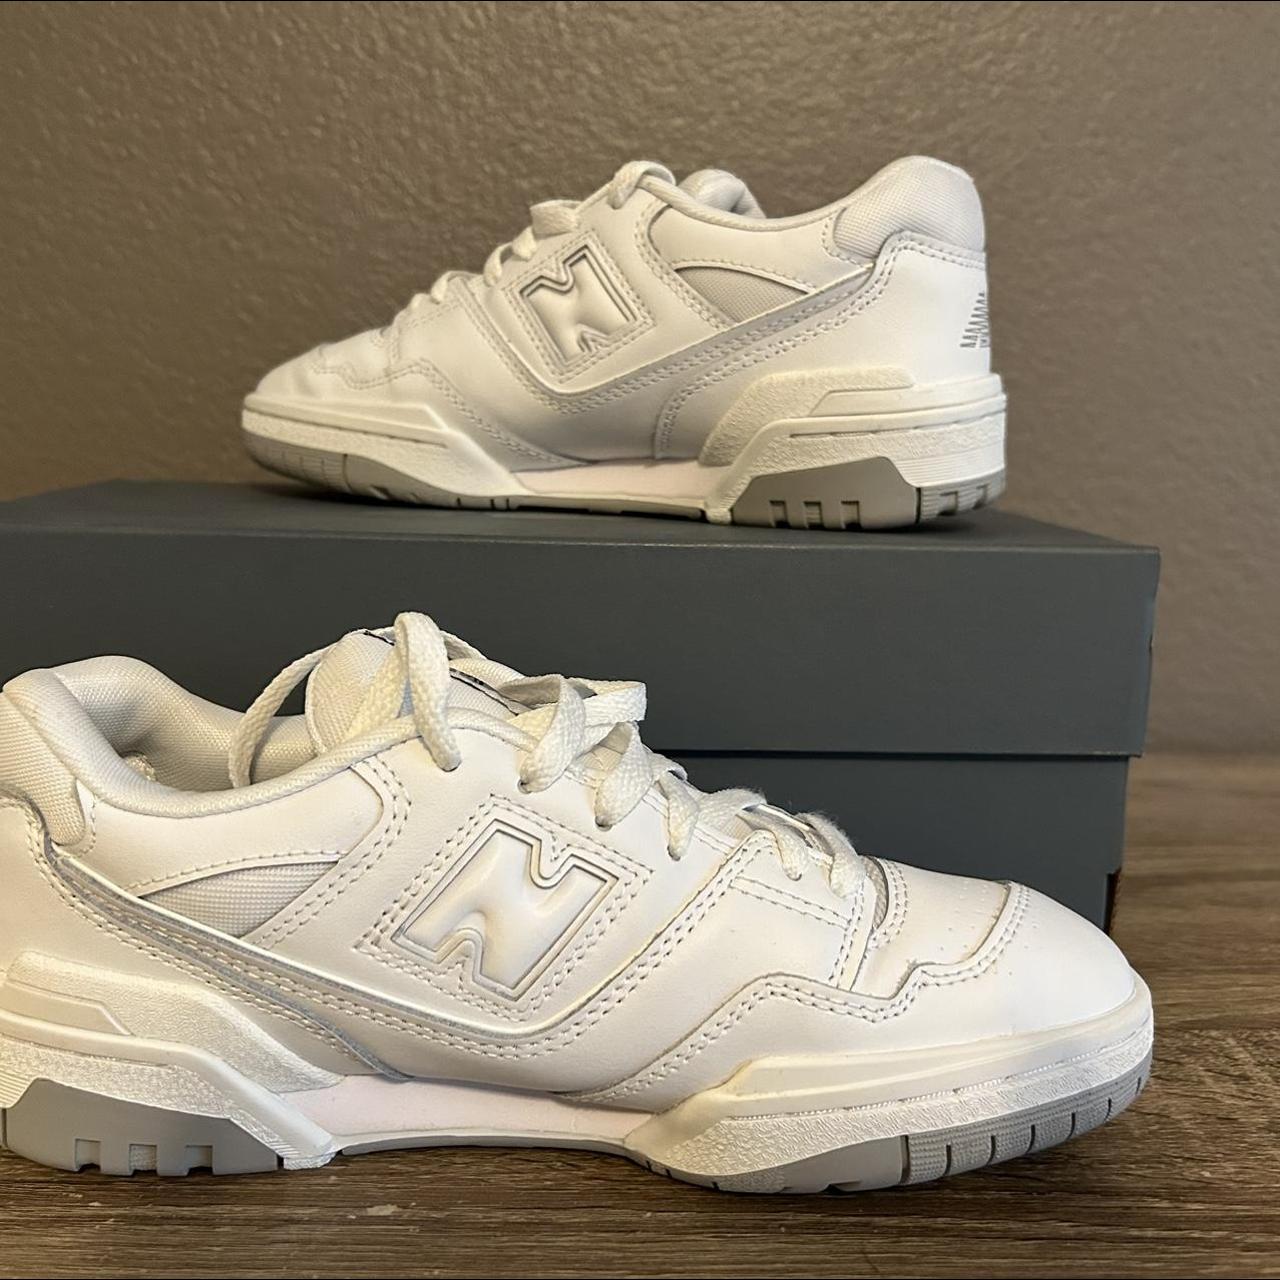 New Balance Women's Grey and White Trainers (3)